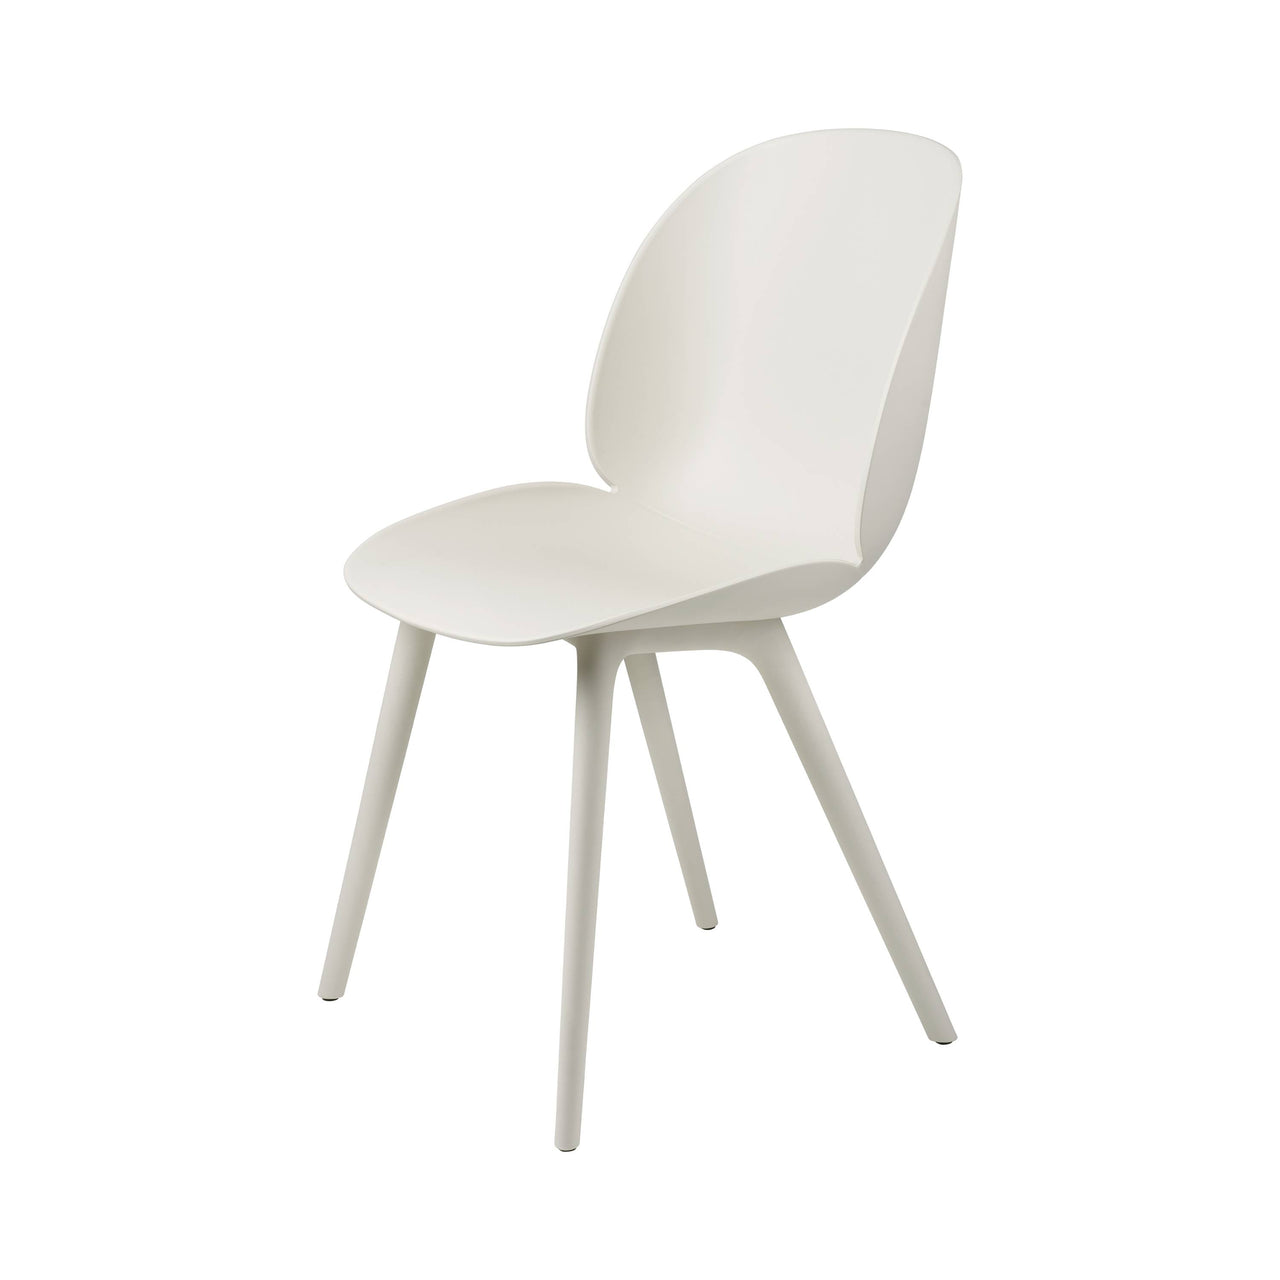 Beetle Outdoor Dining Chair: Plastic Base + Alabaster White + Without Cushion